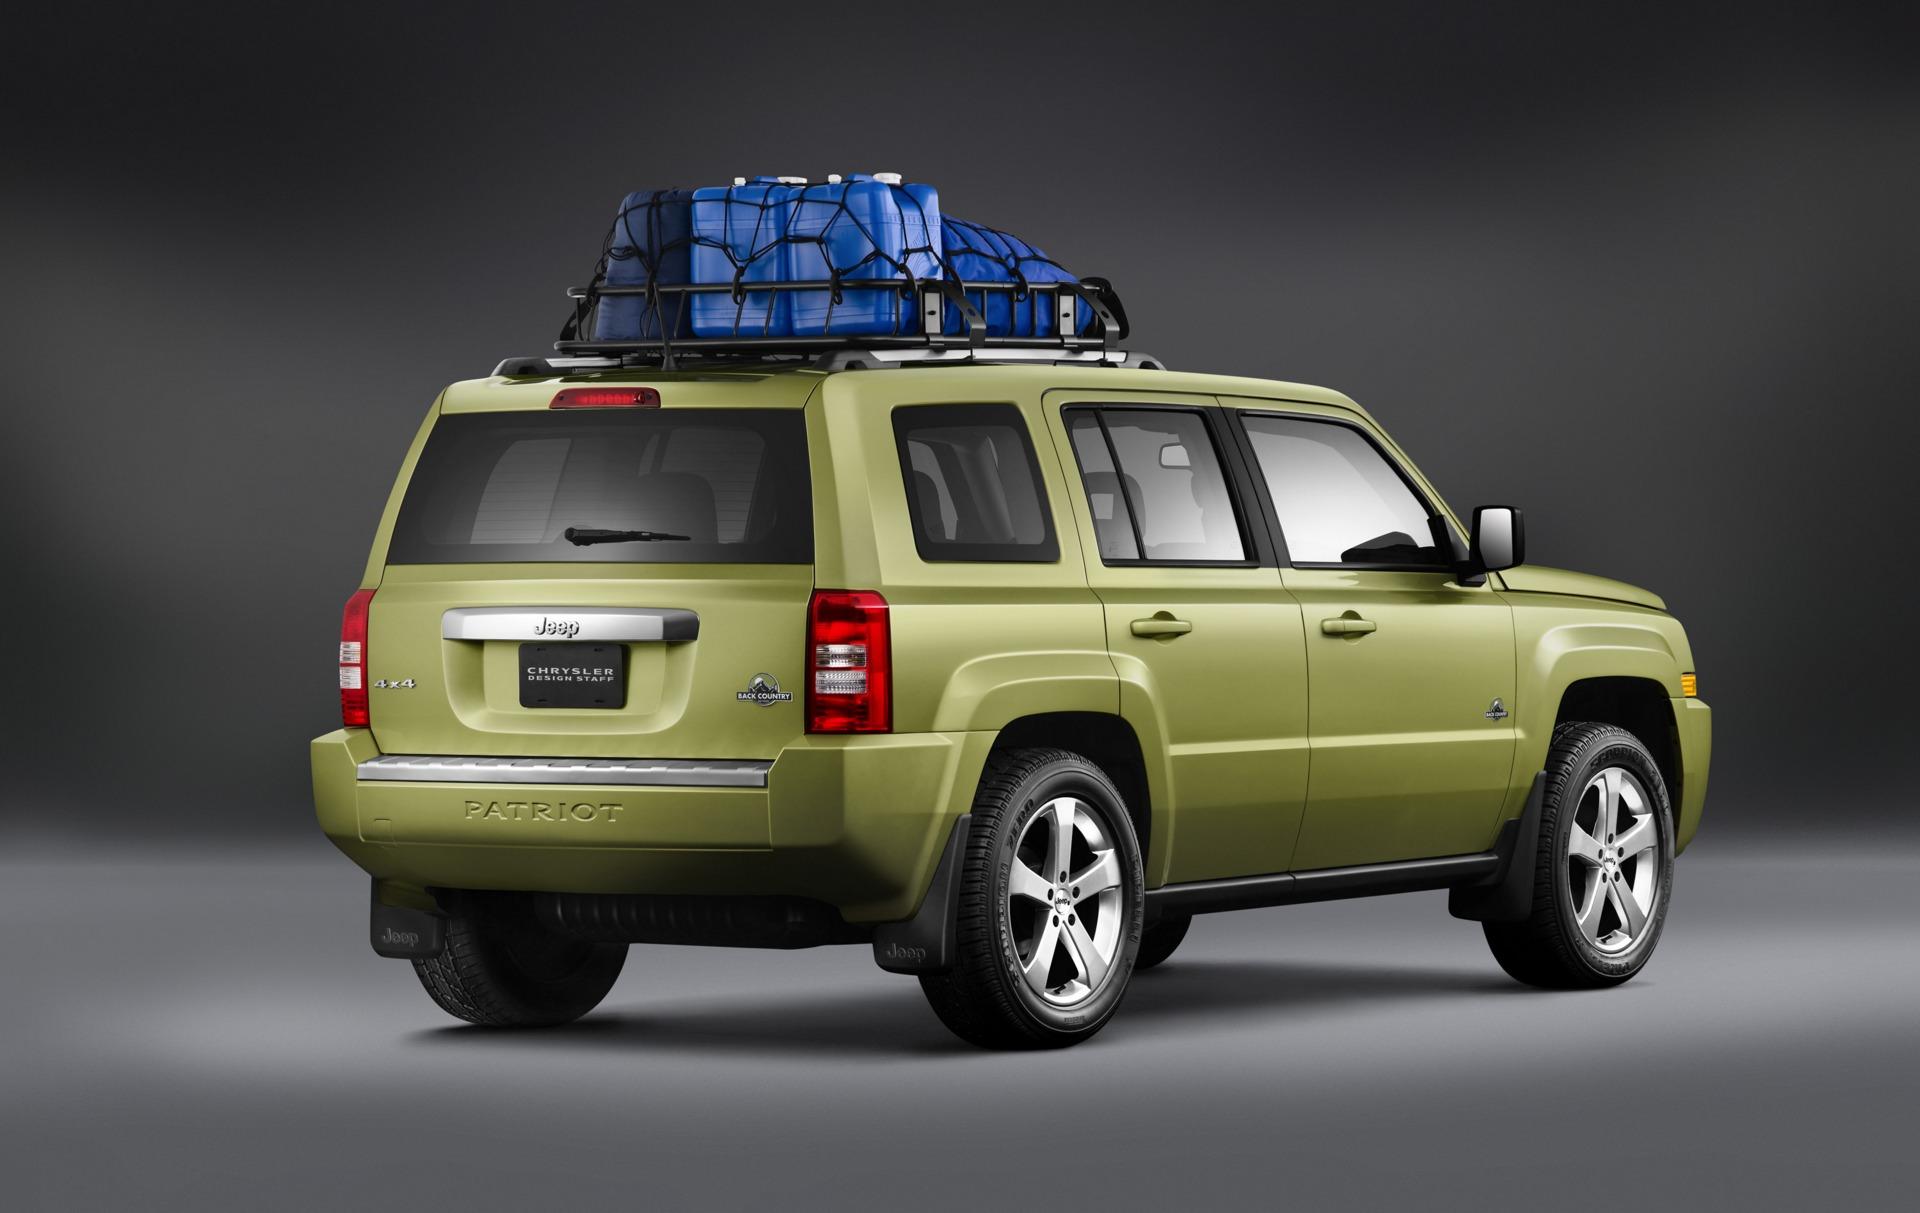 2009 Jeep Patriot Back Country Concept